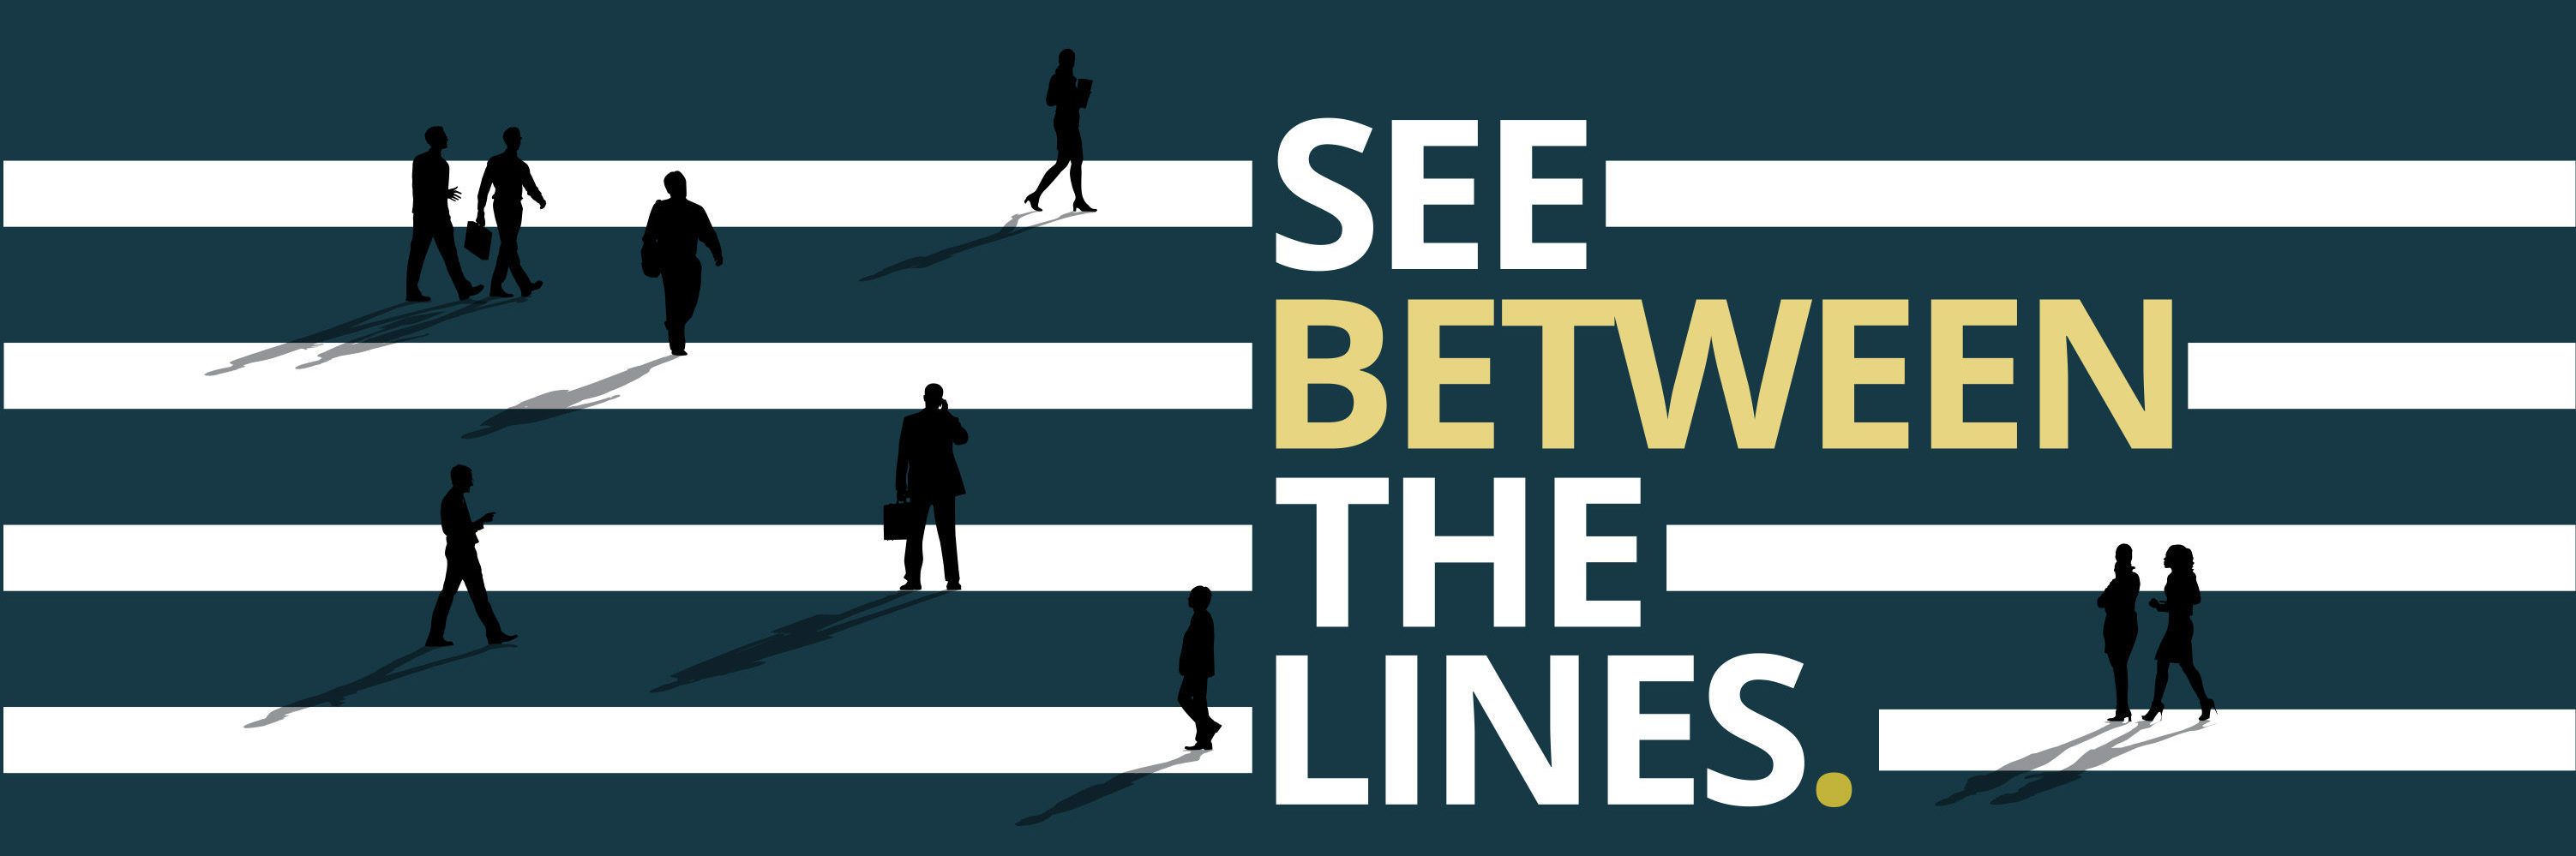 see between the lines | Market Research Firm | Public Opinion Research | Meeting St. Insights